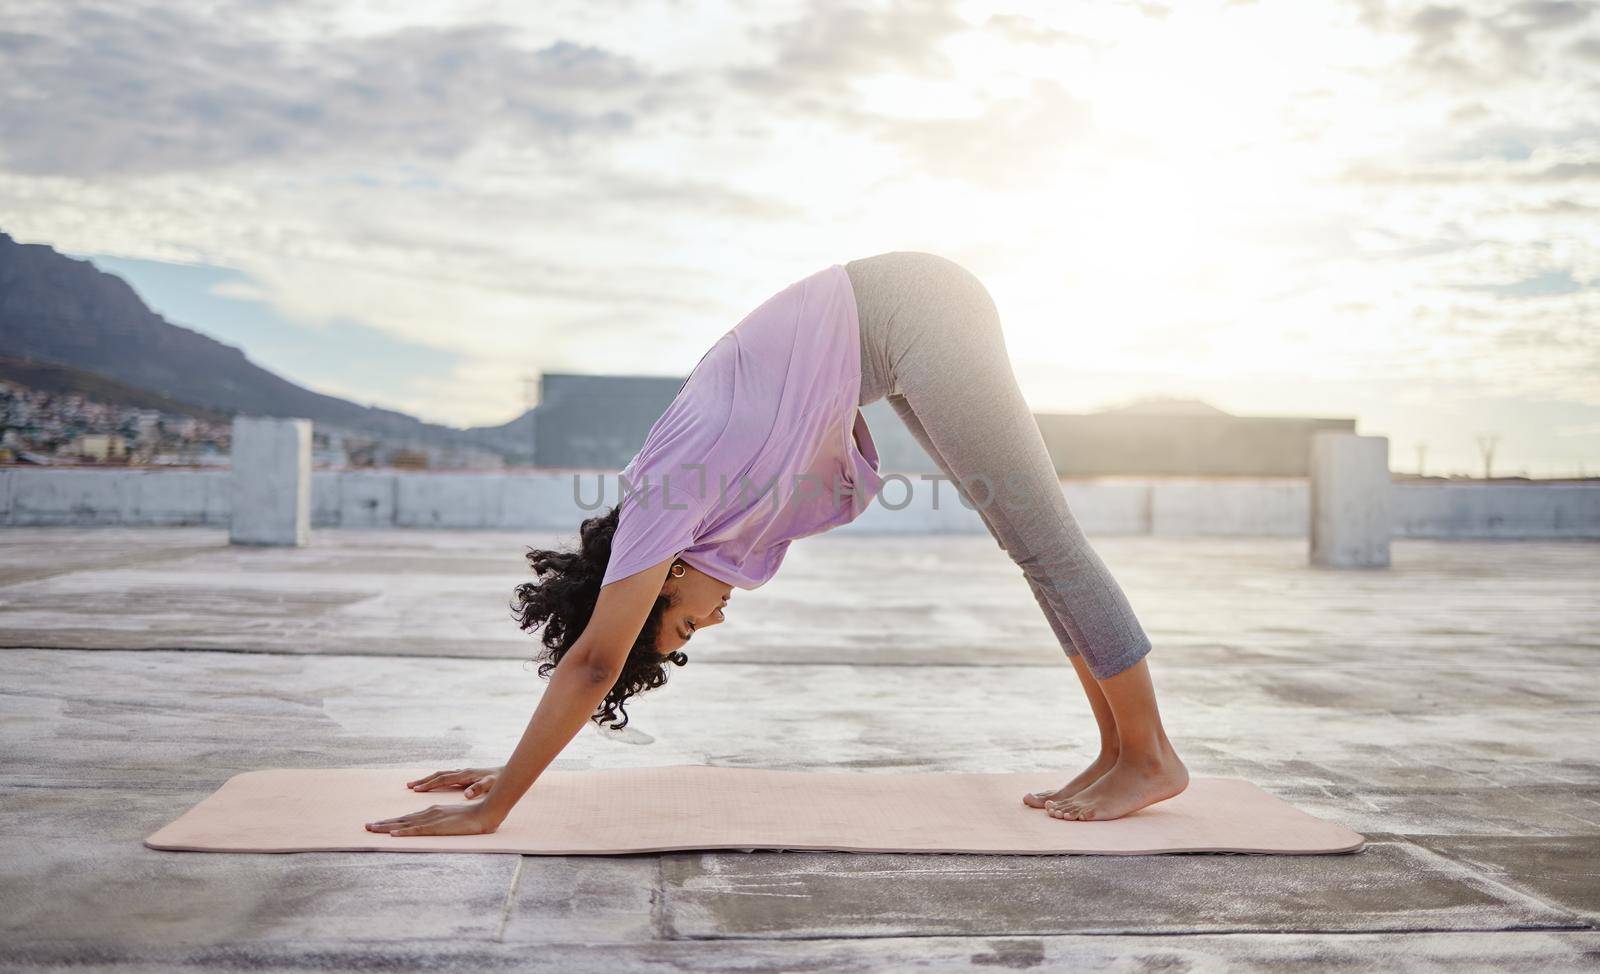 Yoga exercise, city rooftop and woman bending down for balance, wellness and health on an urban building in the morning. Fitness girl training and active during a healthy workout against overcast sky.